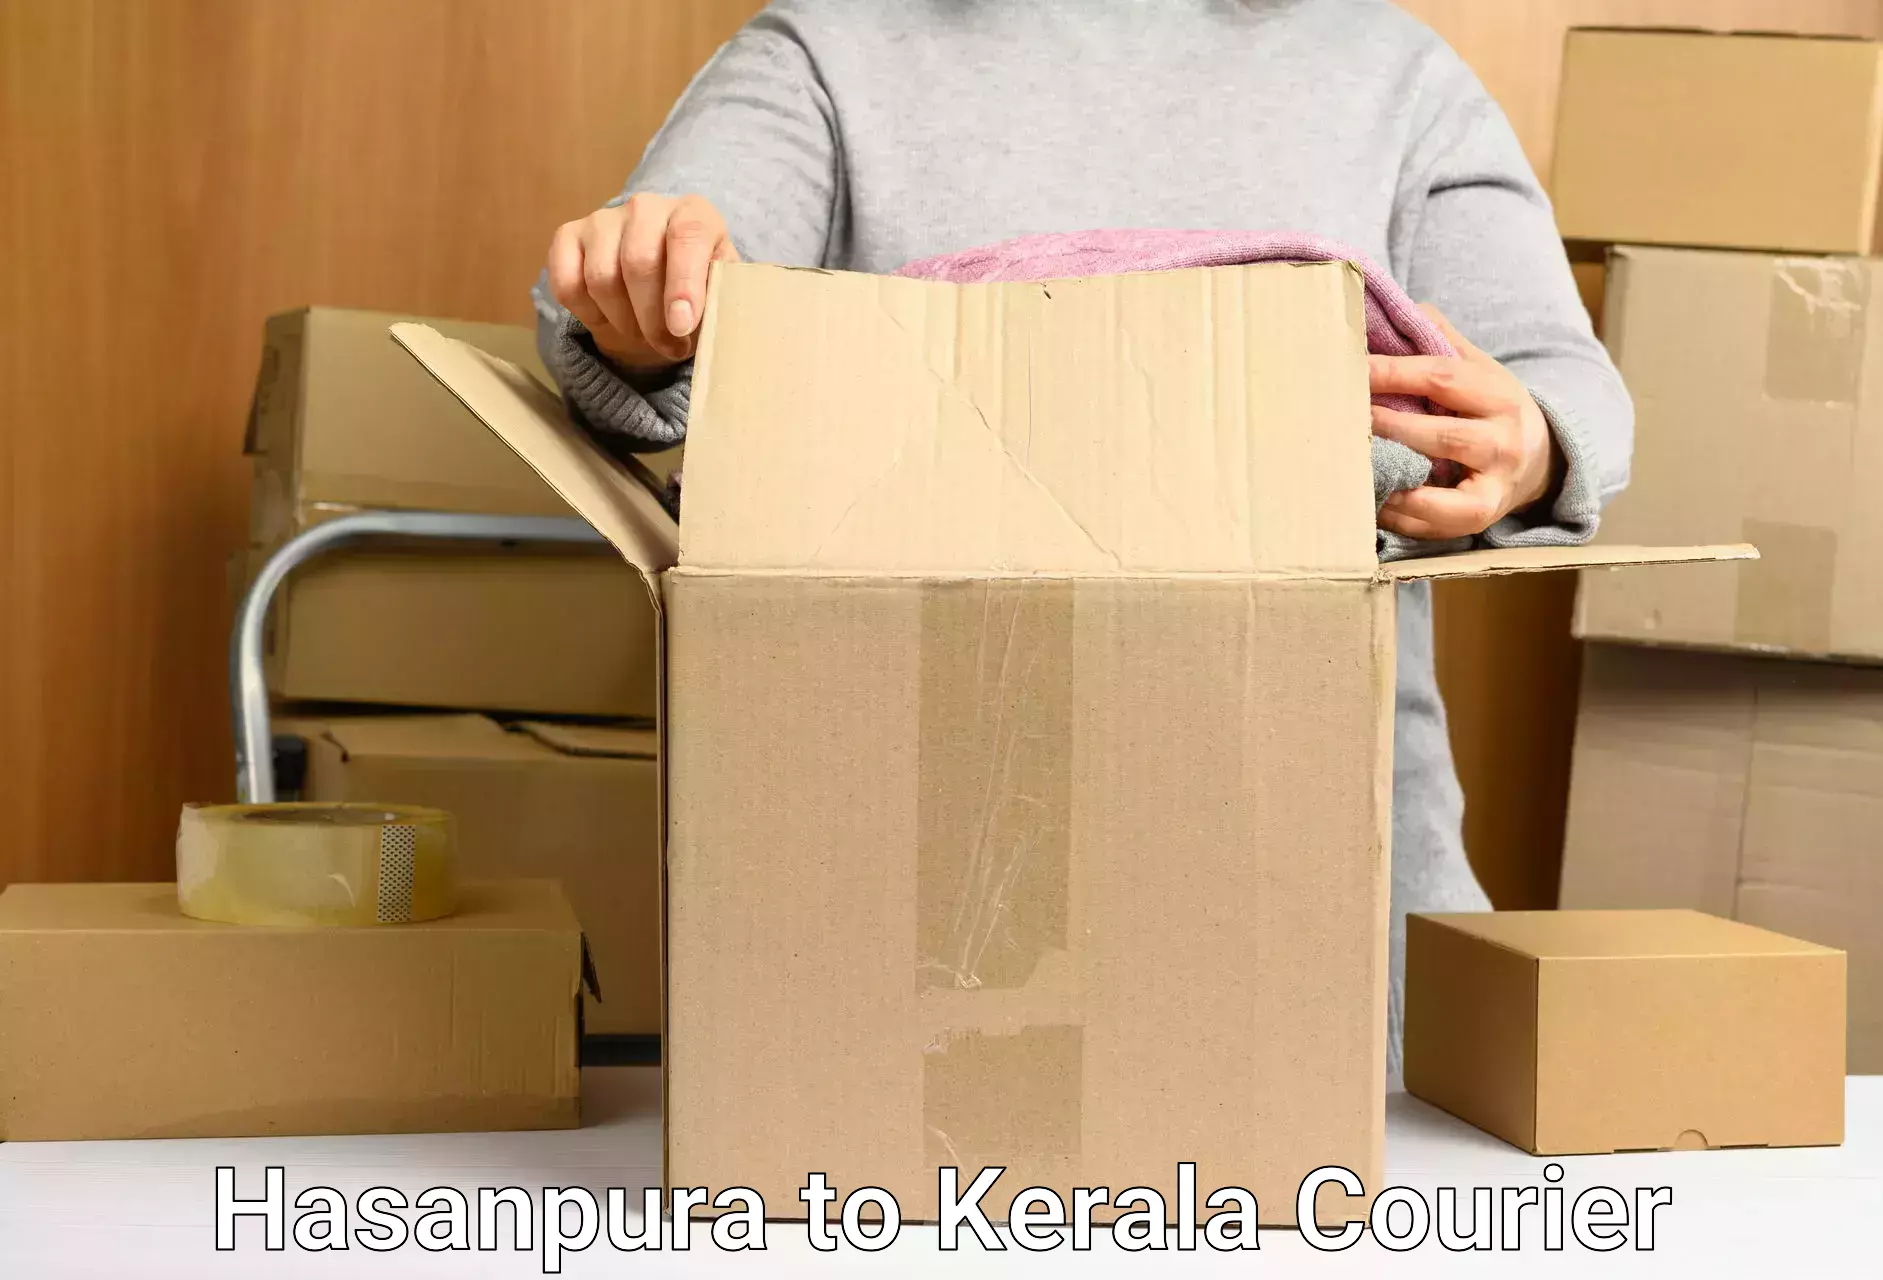 Automated parcel services Hasanpura to Kozhikode